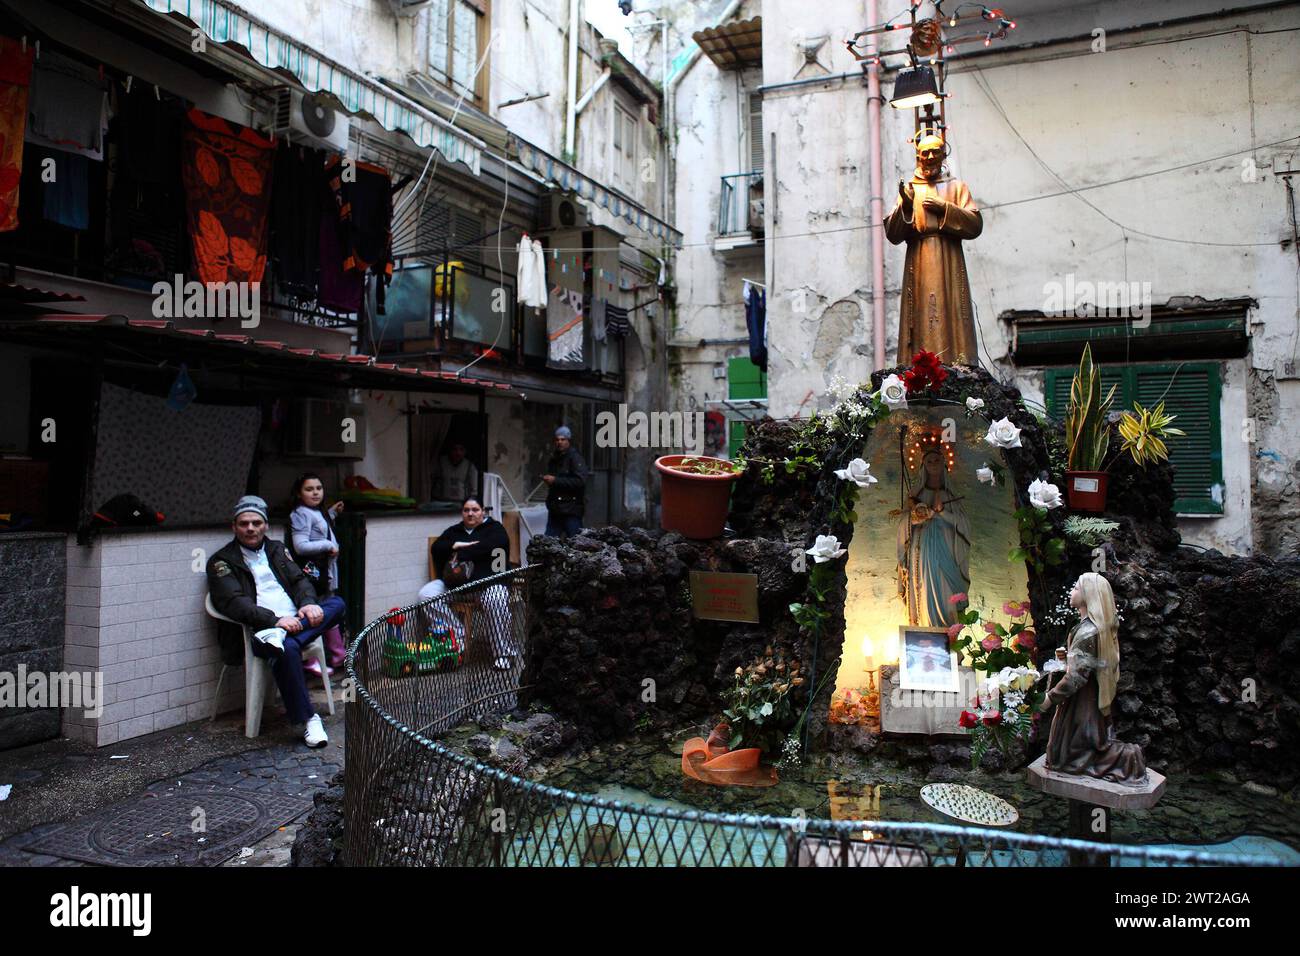 A distinctive glimpse of an alley in the Forcella district of Naples. A statue of saint Padre Pio in front of the houses and the premises where many f Stock Photo